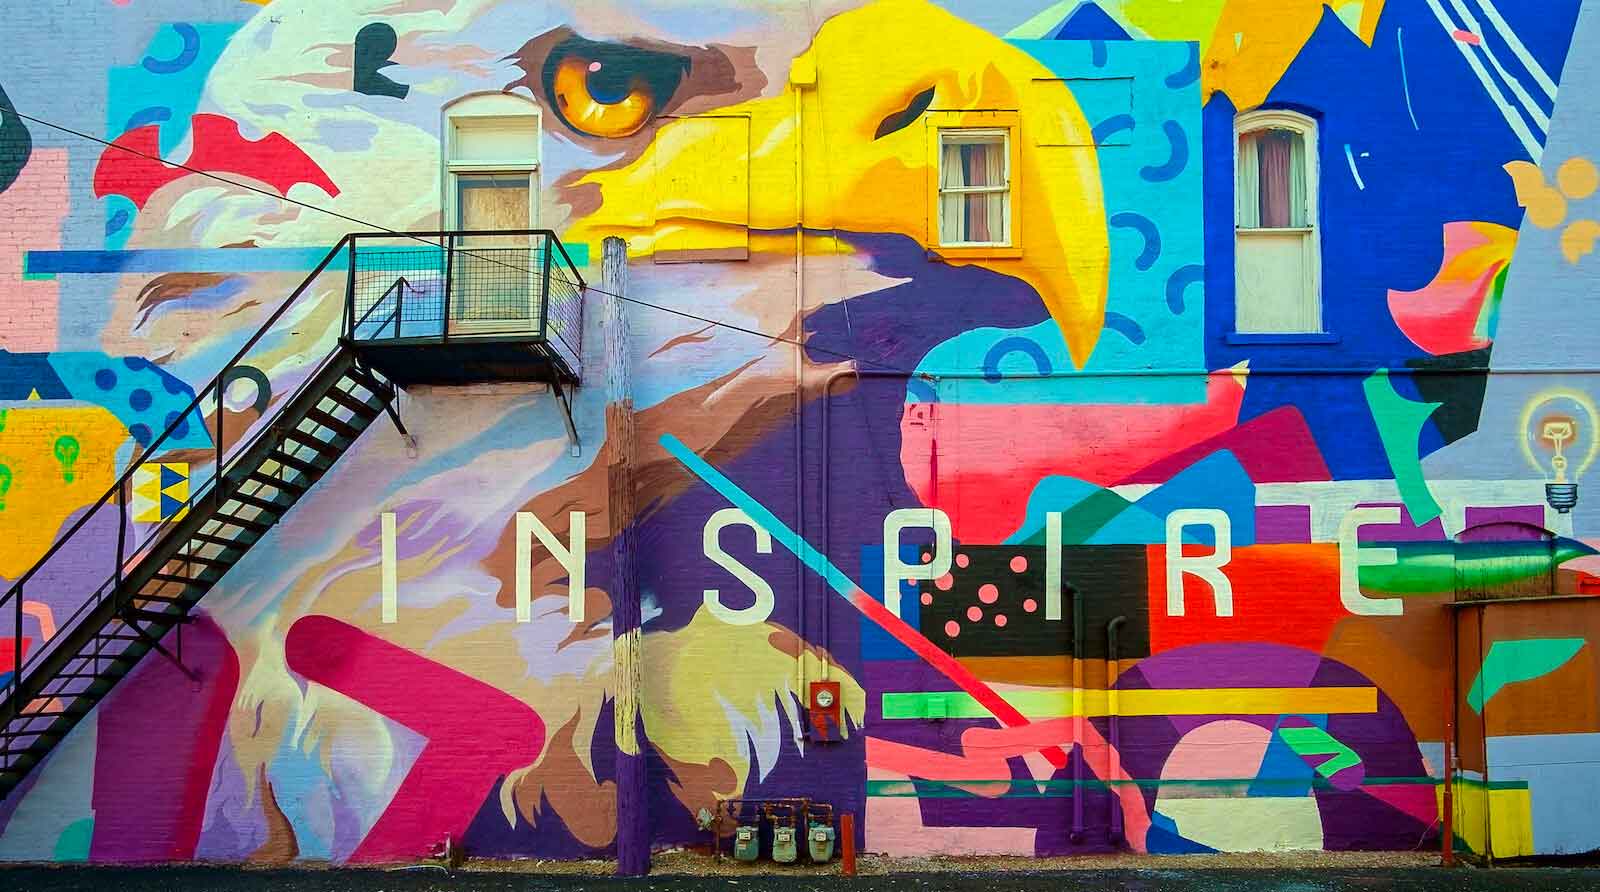 Inspire mural on building exterior